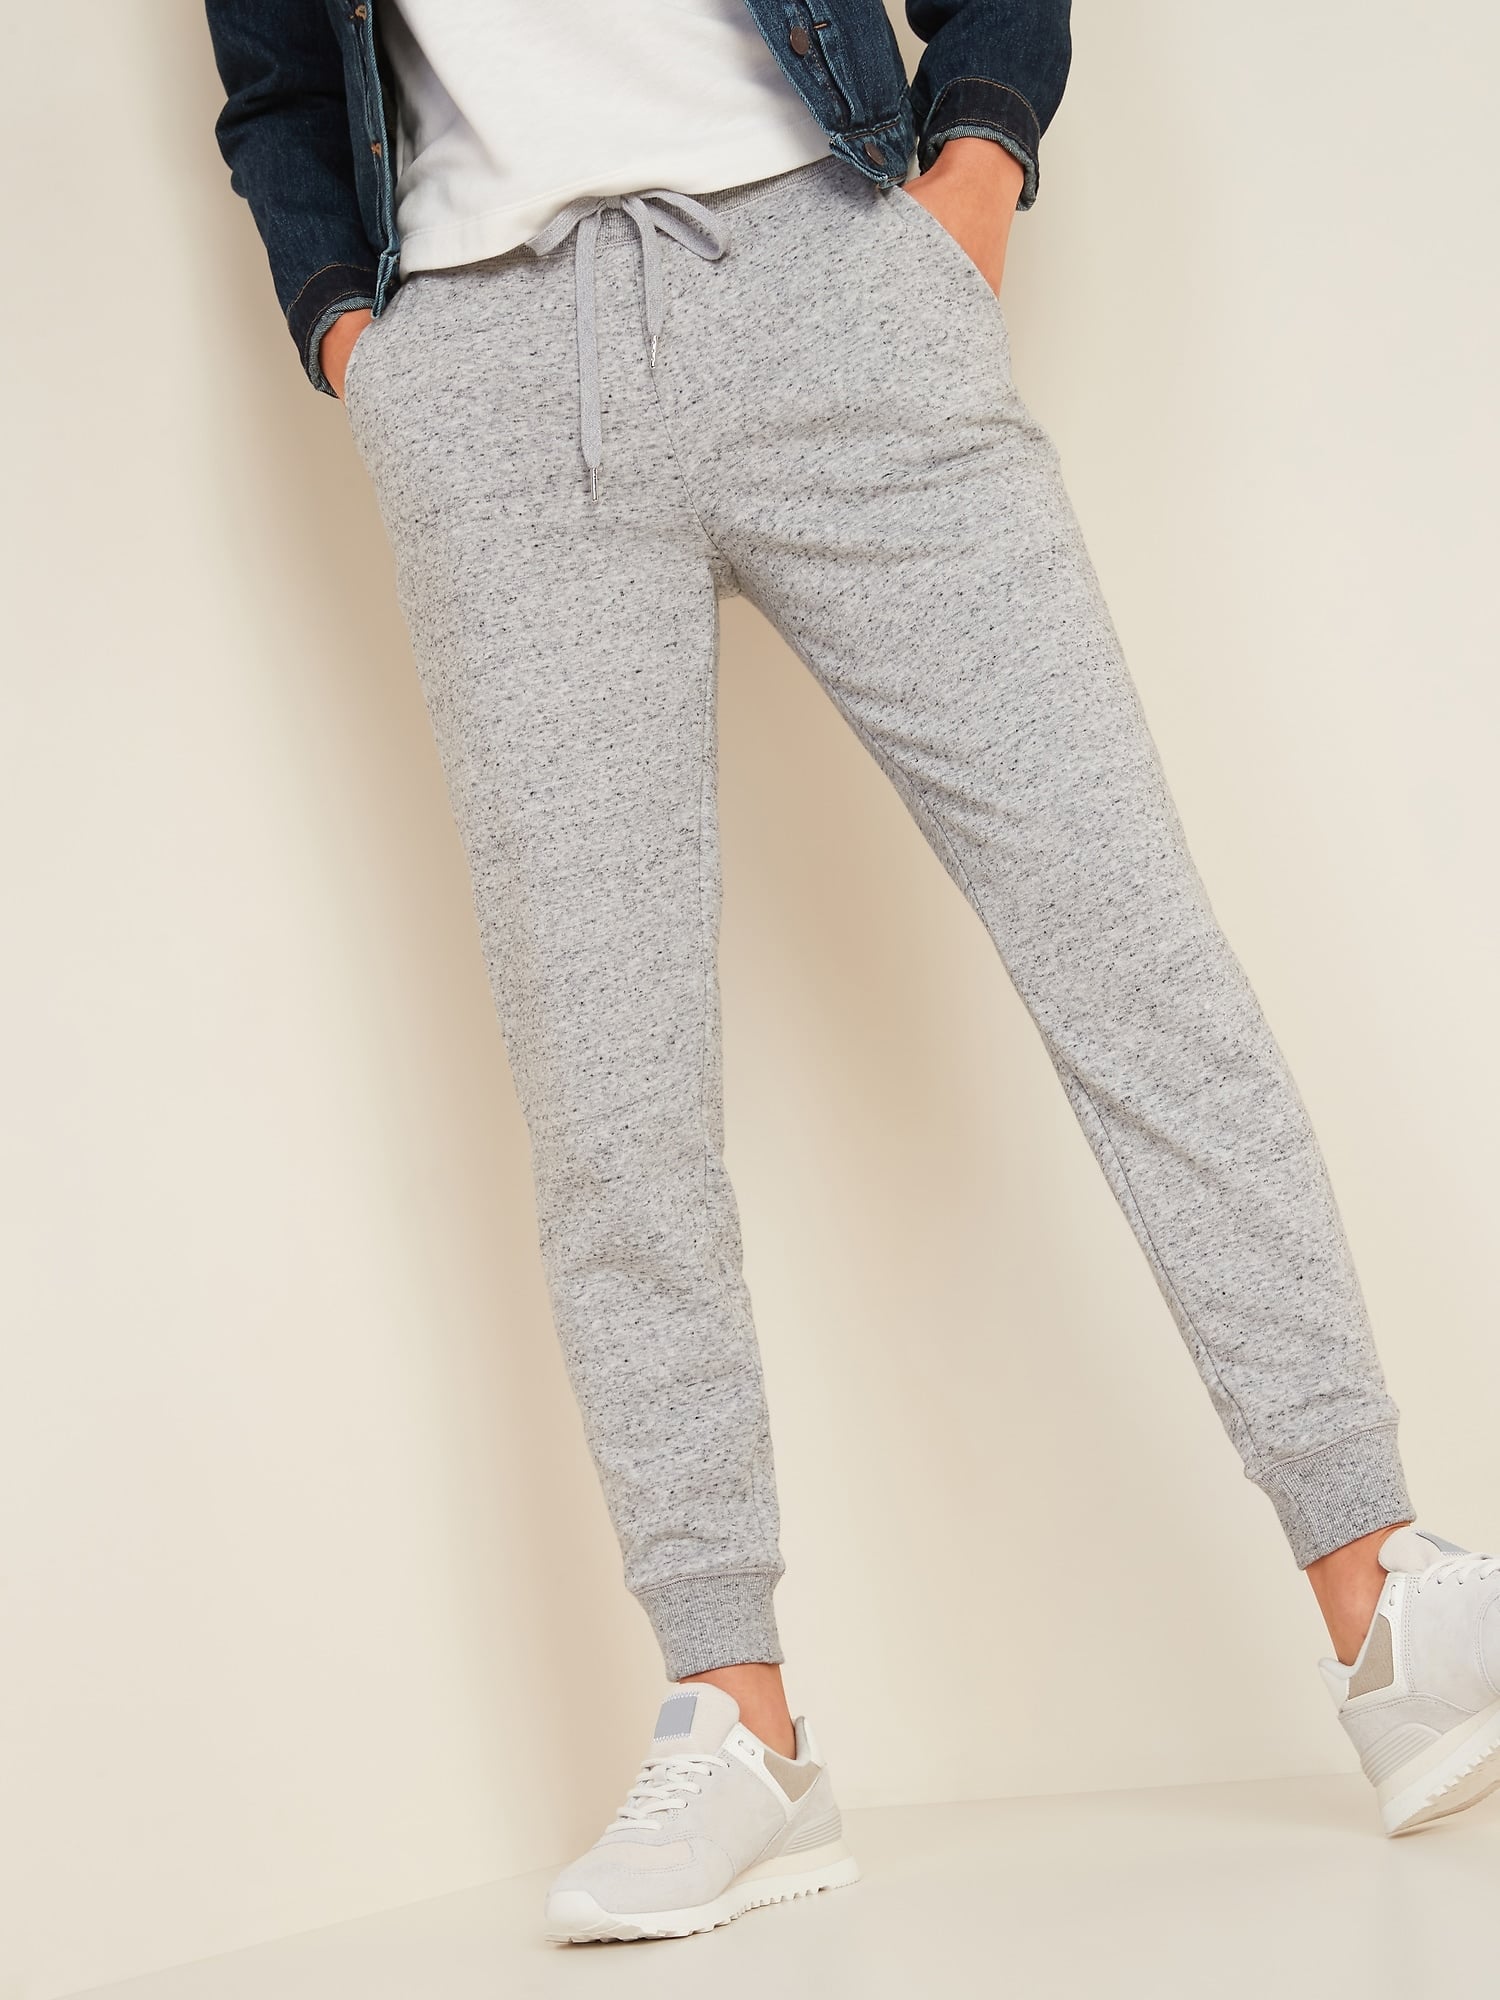 gray joggers outfit for Sale,Up To OFF 70%